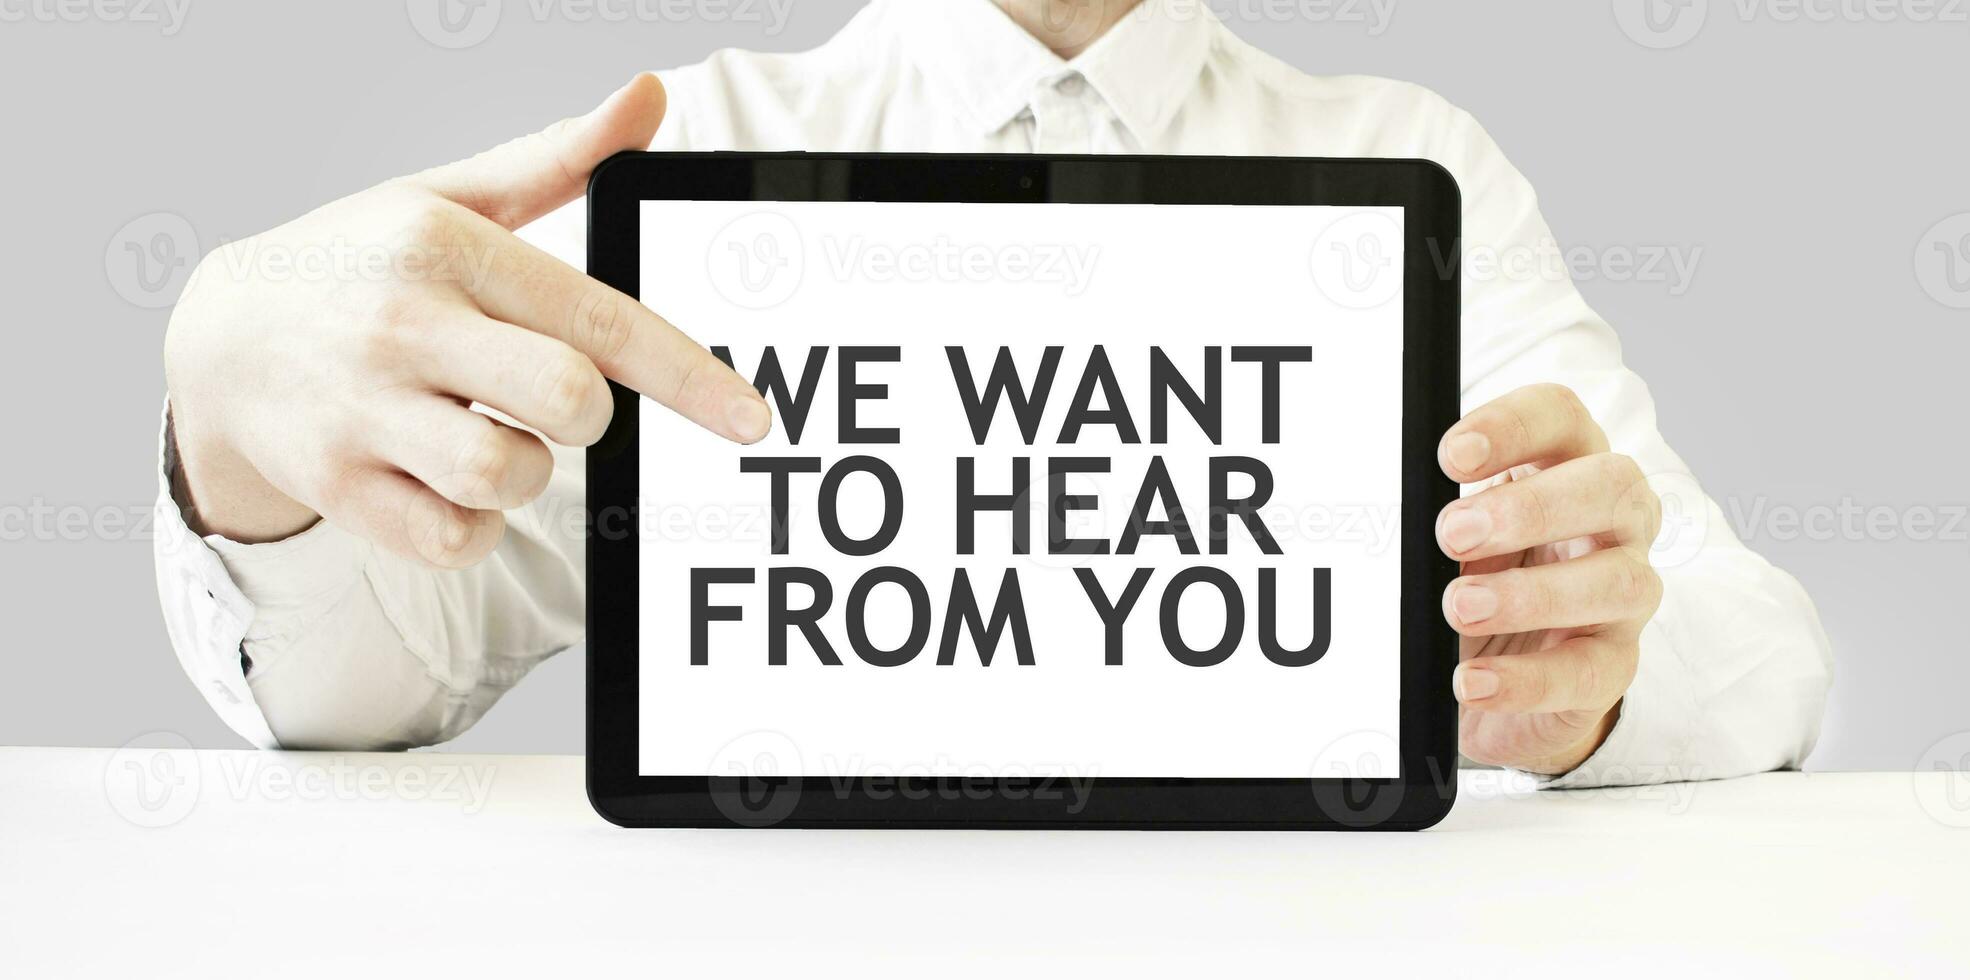 Text WE WANT TO HEAR FROM YOU on tablet display in businessman hands on the white background. Business concept photo